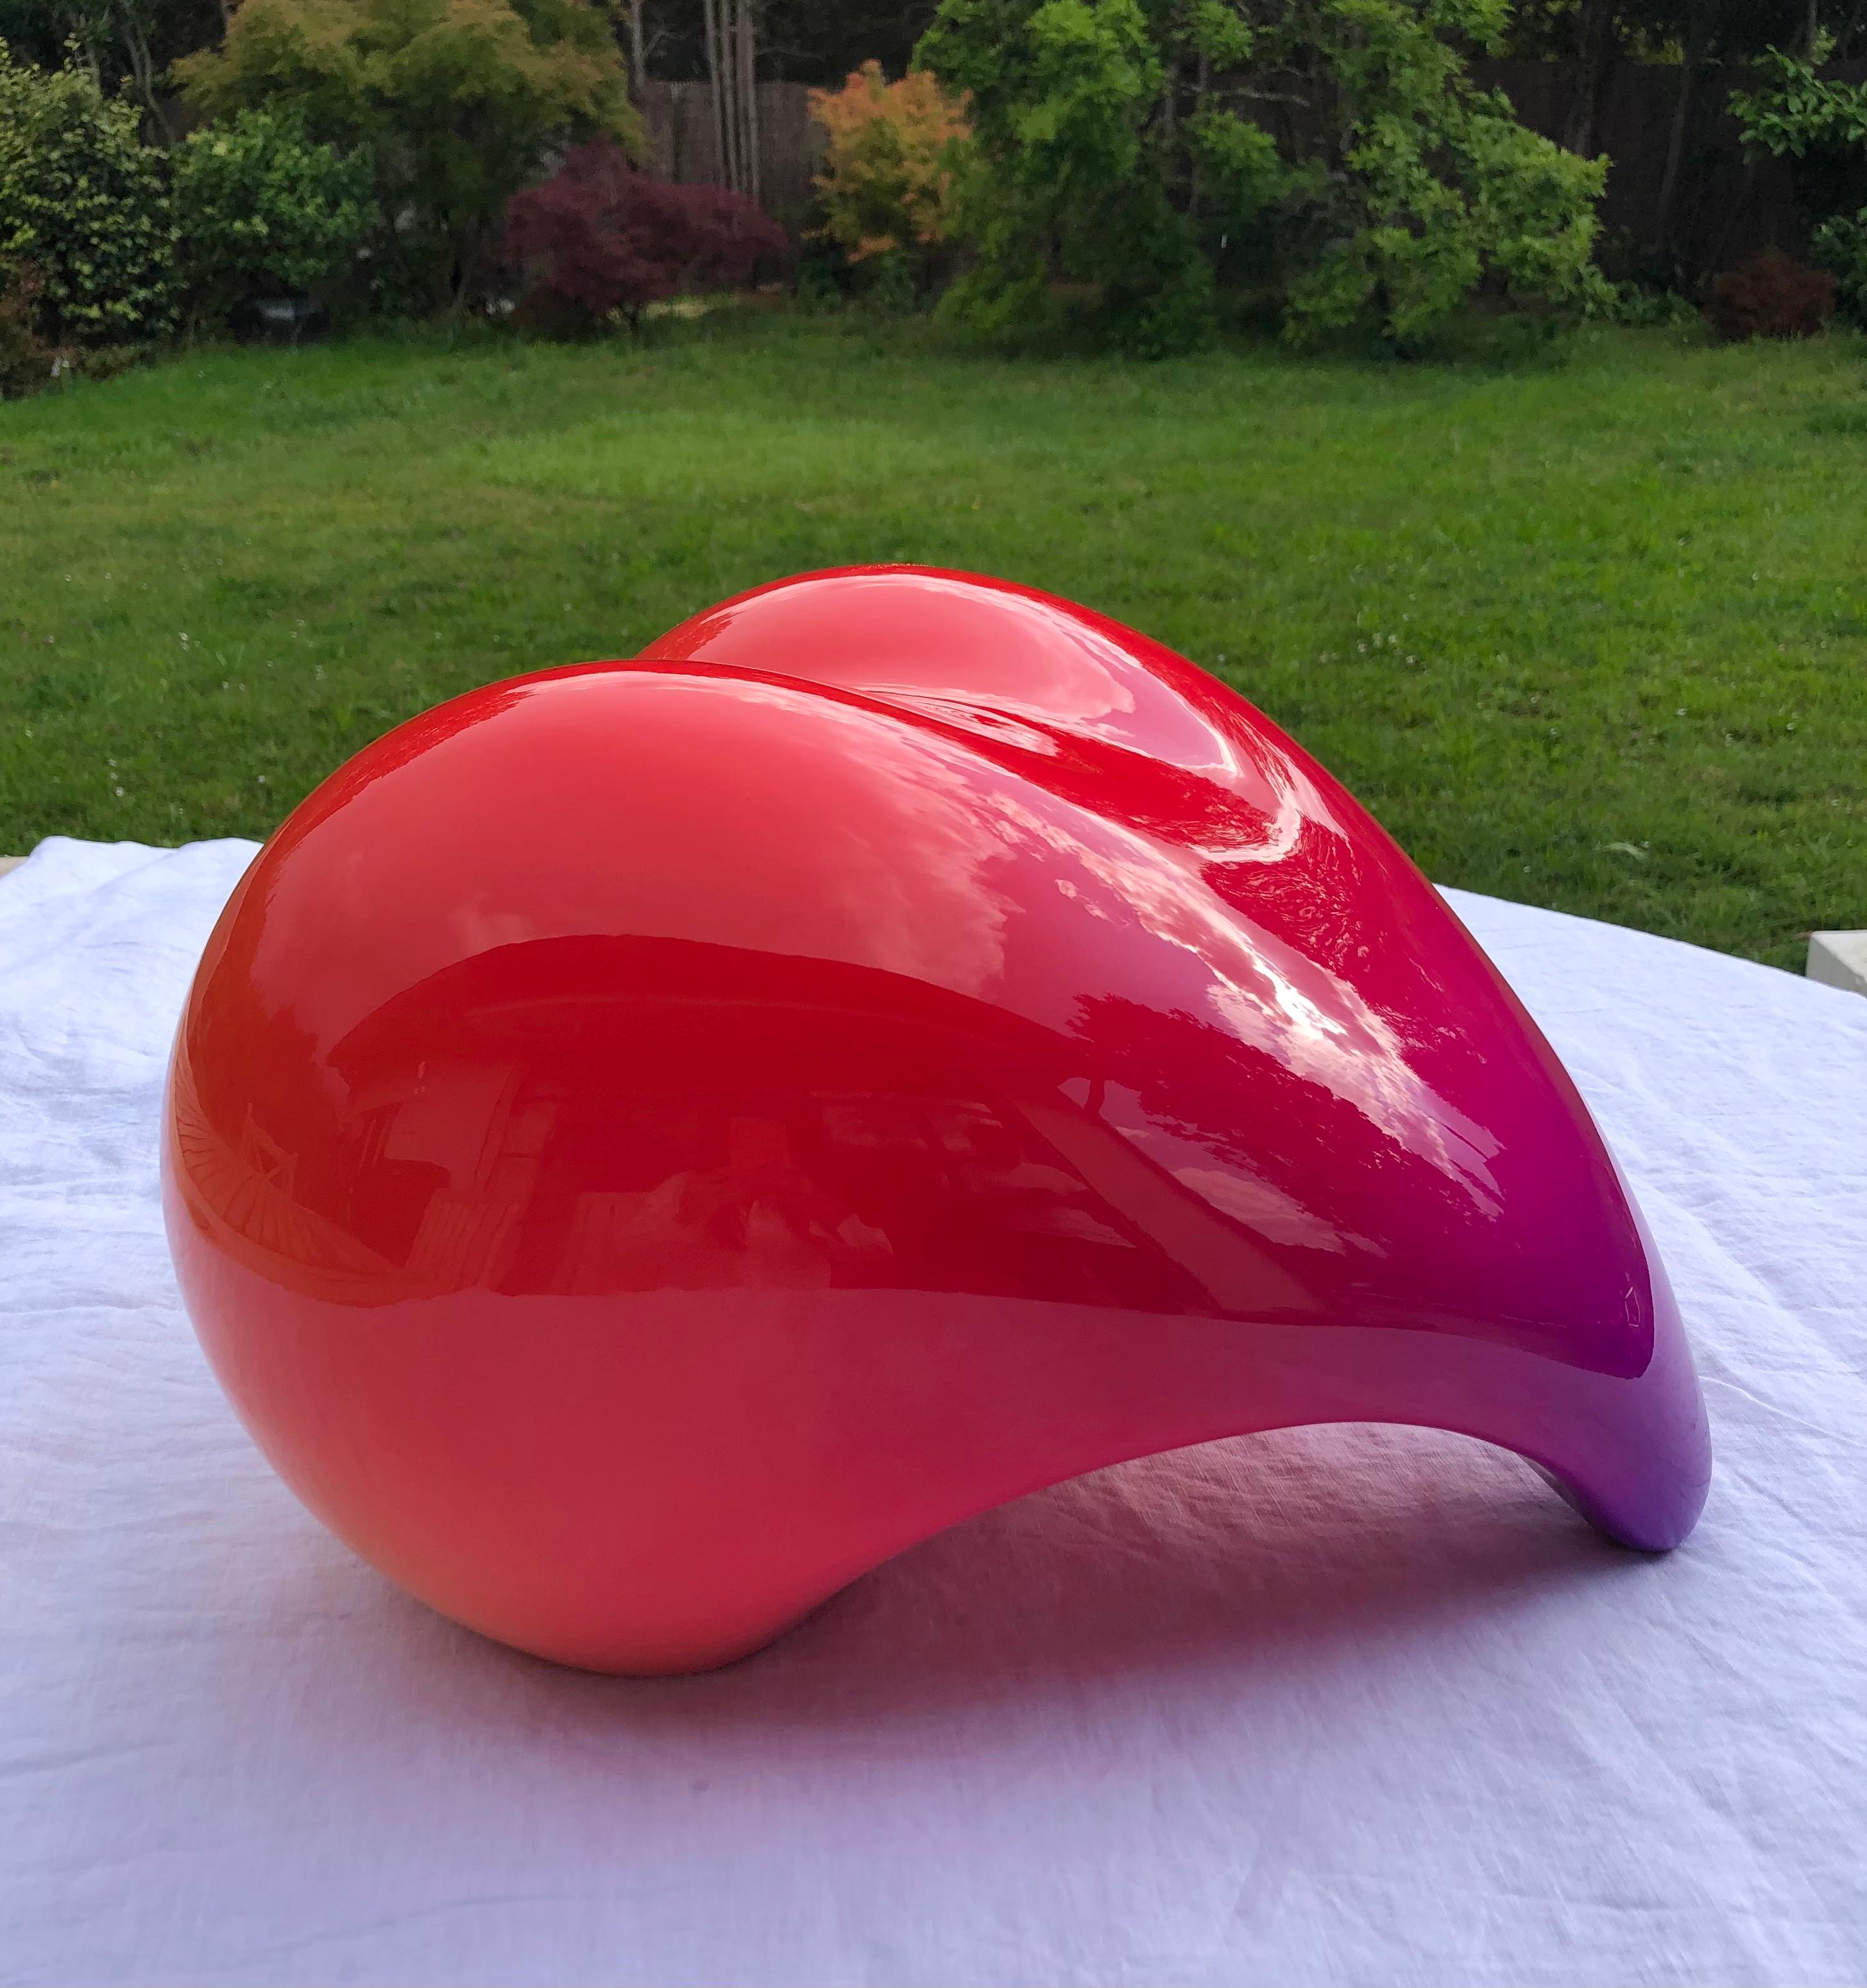 Imagine II - Pink Abstract Sculpture by Cat Sirot